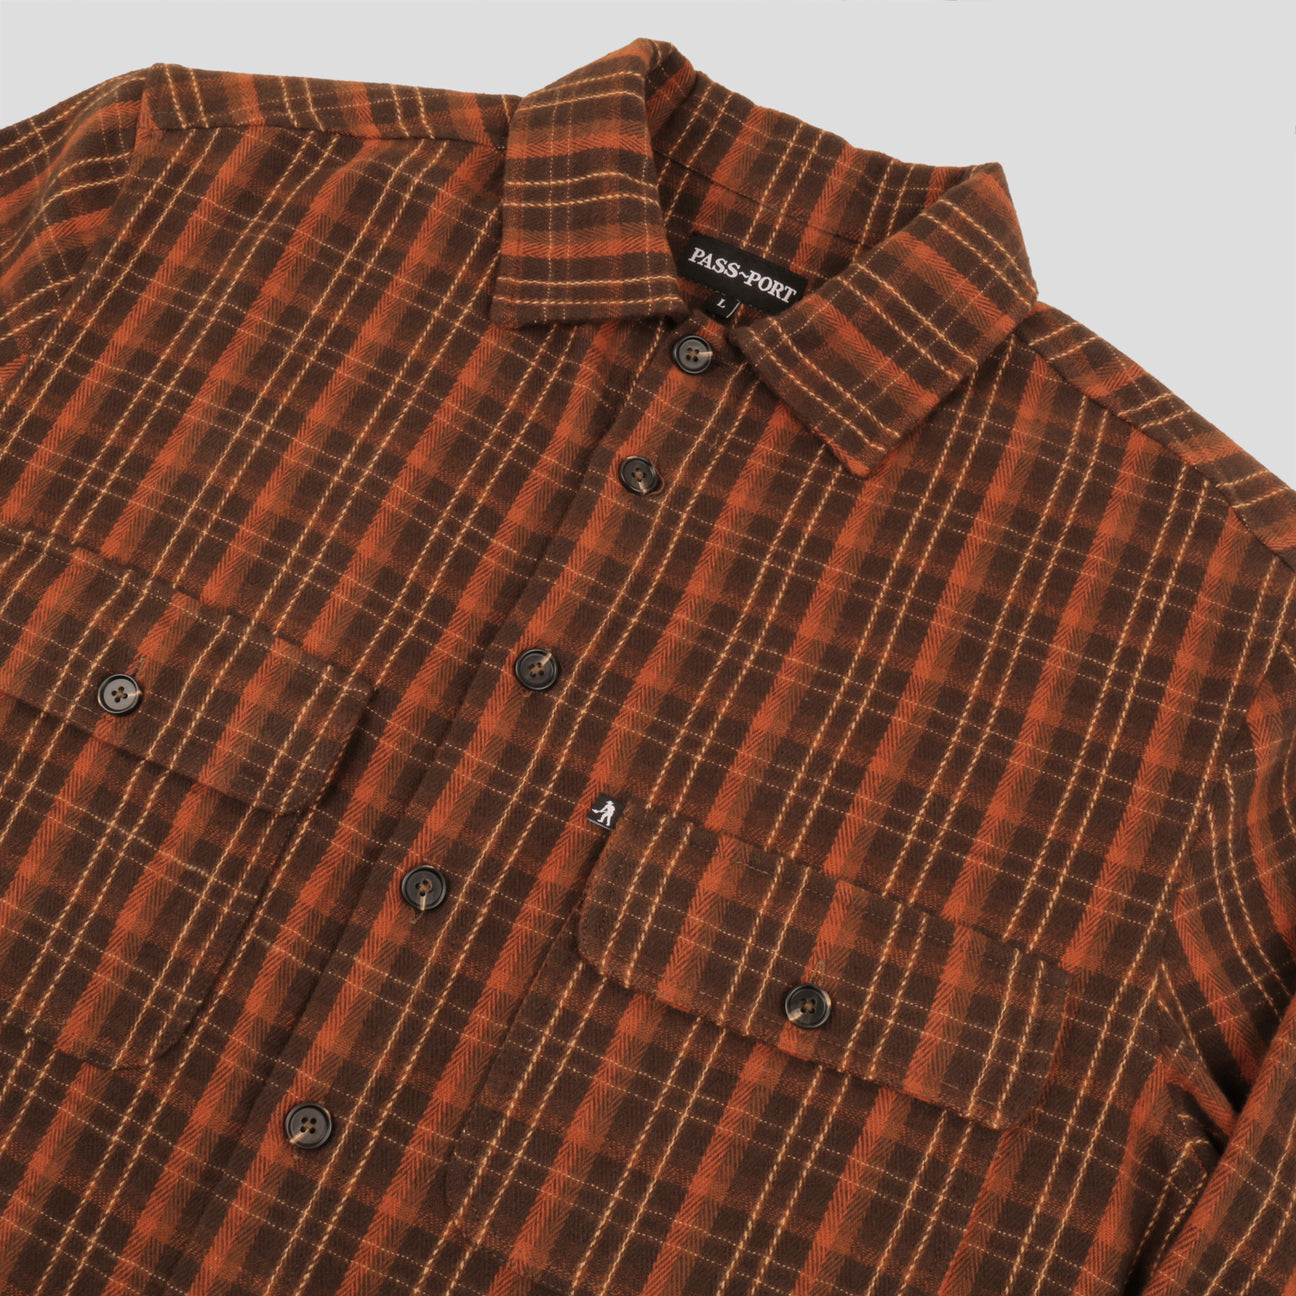 Pass-Port Workers Flannel Choc